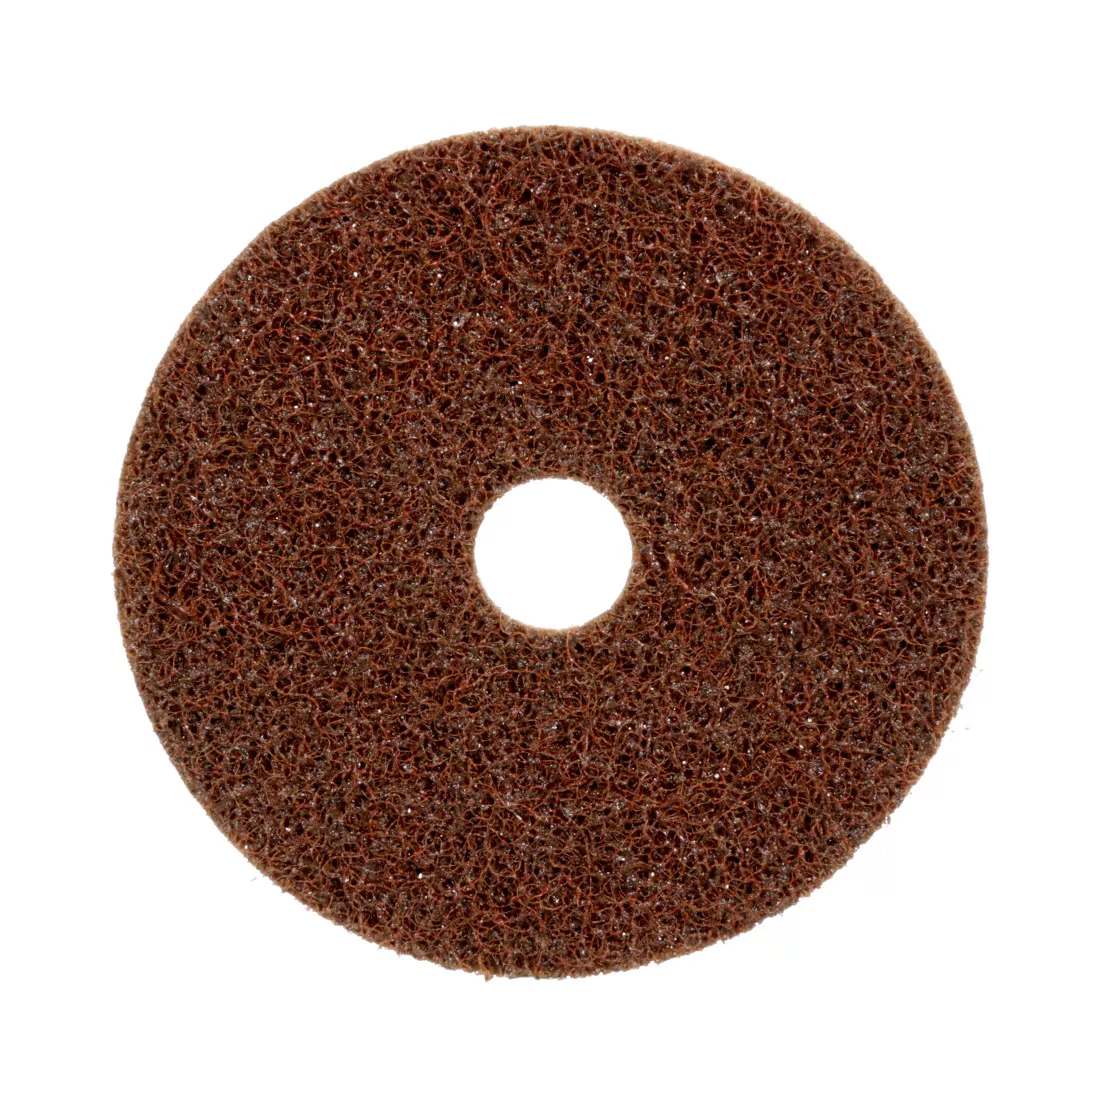 Scotch-Brite™ SL Surface Conditioning Disc, SL-DH, Heavy Duty A Coarse,
7 in x 7/8 in